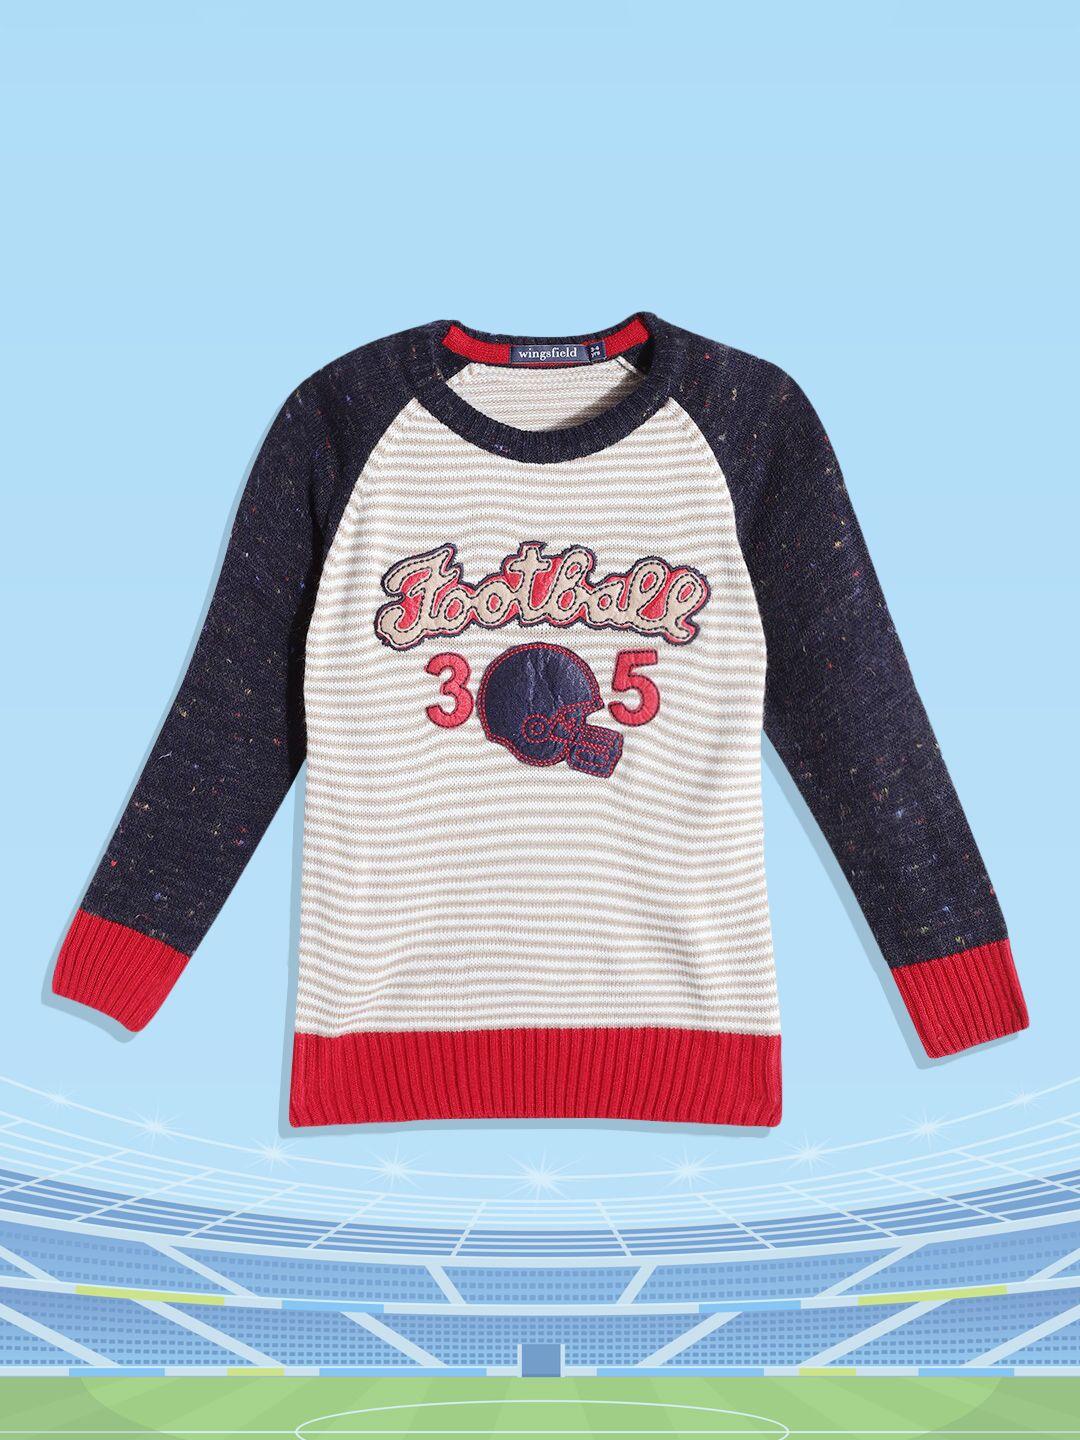 wingsfield boys beige & navy blue striped acrylic pullover with applique detail